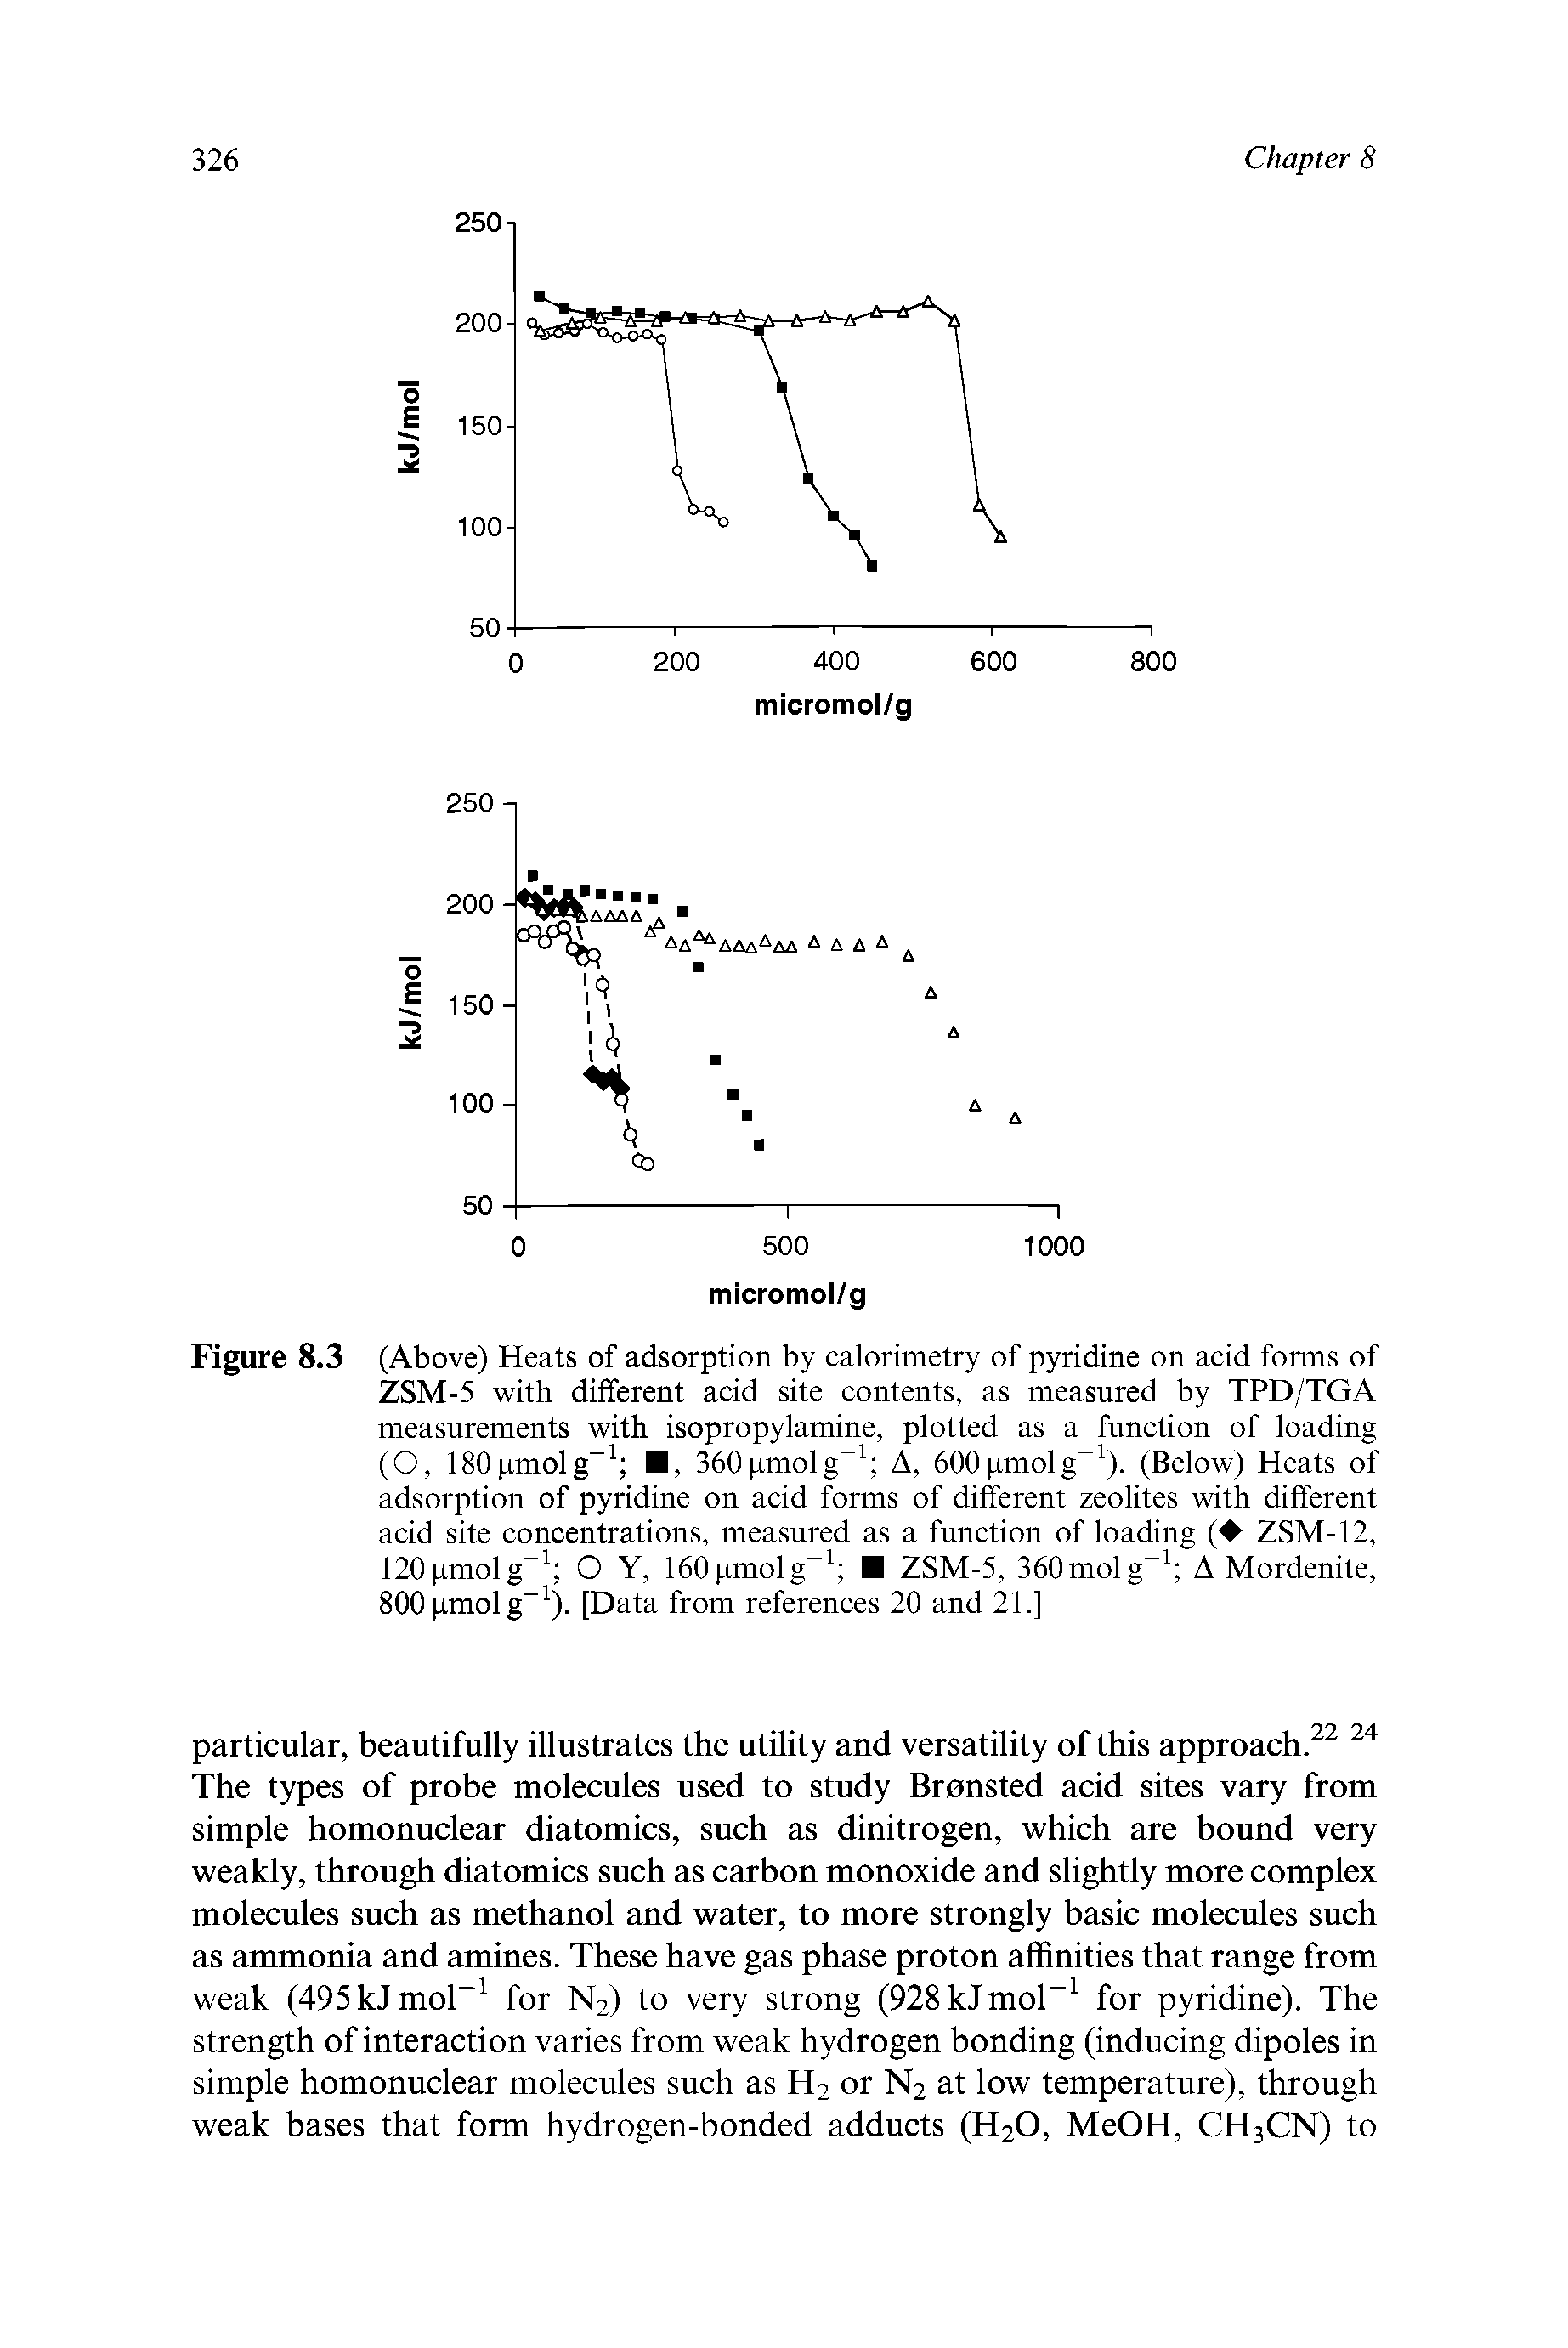 Figure 8.3 (Above) Heats of adsorption by calorimetry of pyridine on acid forms of ZSM-5 with different acid site contents, as measured by TPD/TGA measurements with isopropylamine, plotted as a function of loading (O, ISOpmolg , 360pmolg A, 600pmolg ). (Below) Heats of adsorption of pyridine on acid forms of different zeolites with different acid site concentrations, measured as a function of loading ( ZSM-12, 120 j,molg O Y, 160pmolg ZSM-5, 360molg A Mordenite, 800 J,molg ). [Data from references 20 and 21.]...